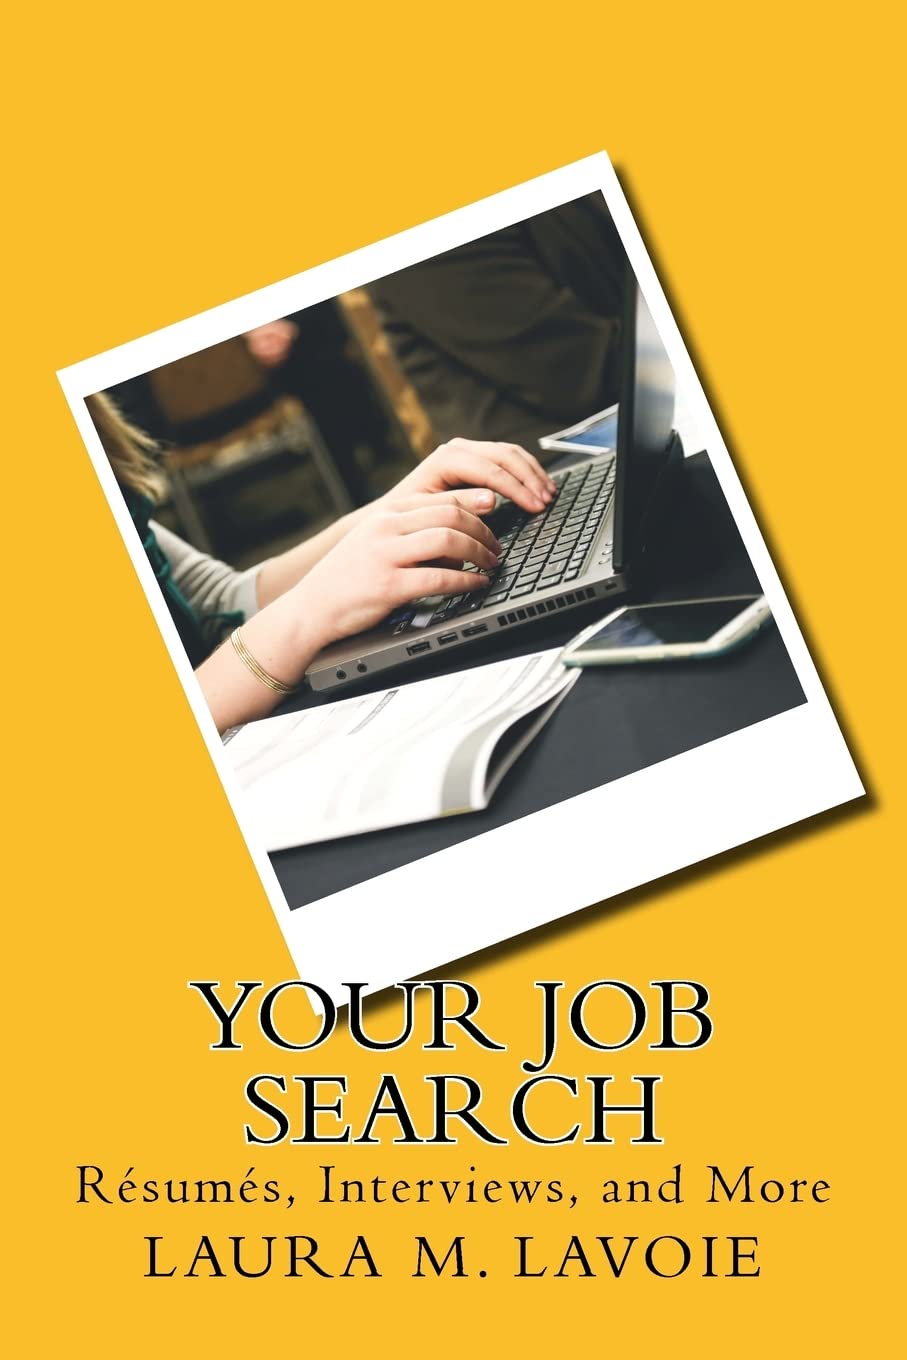 Your Job Search: Resumes, Interviews, and More